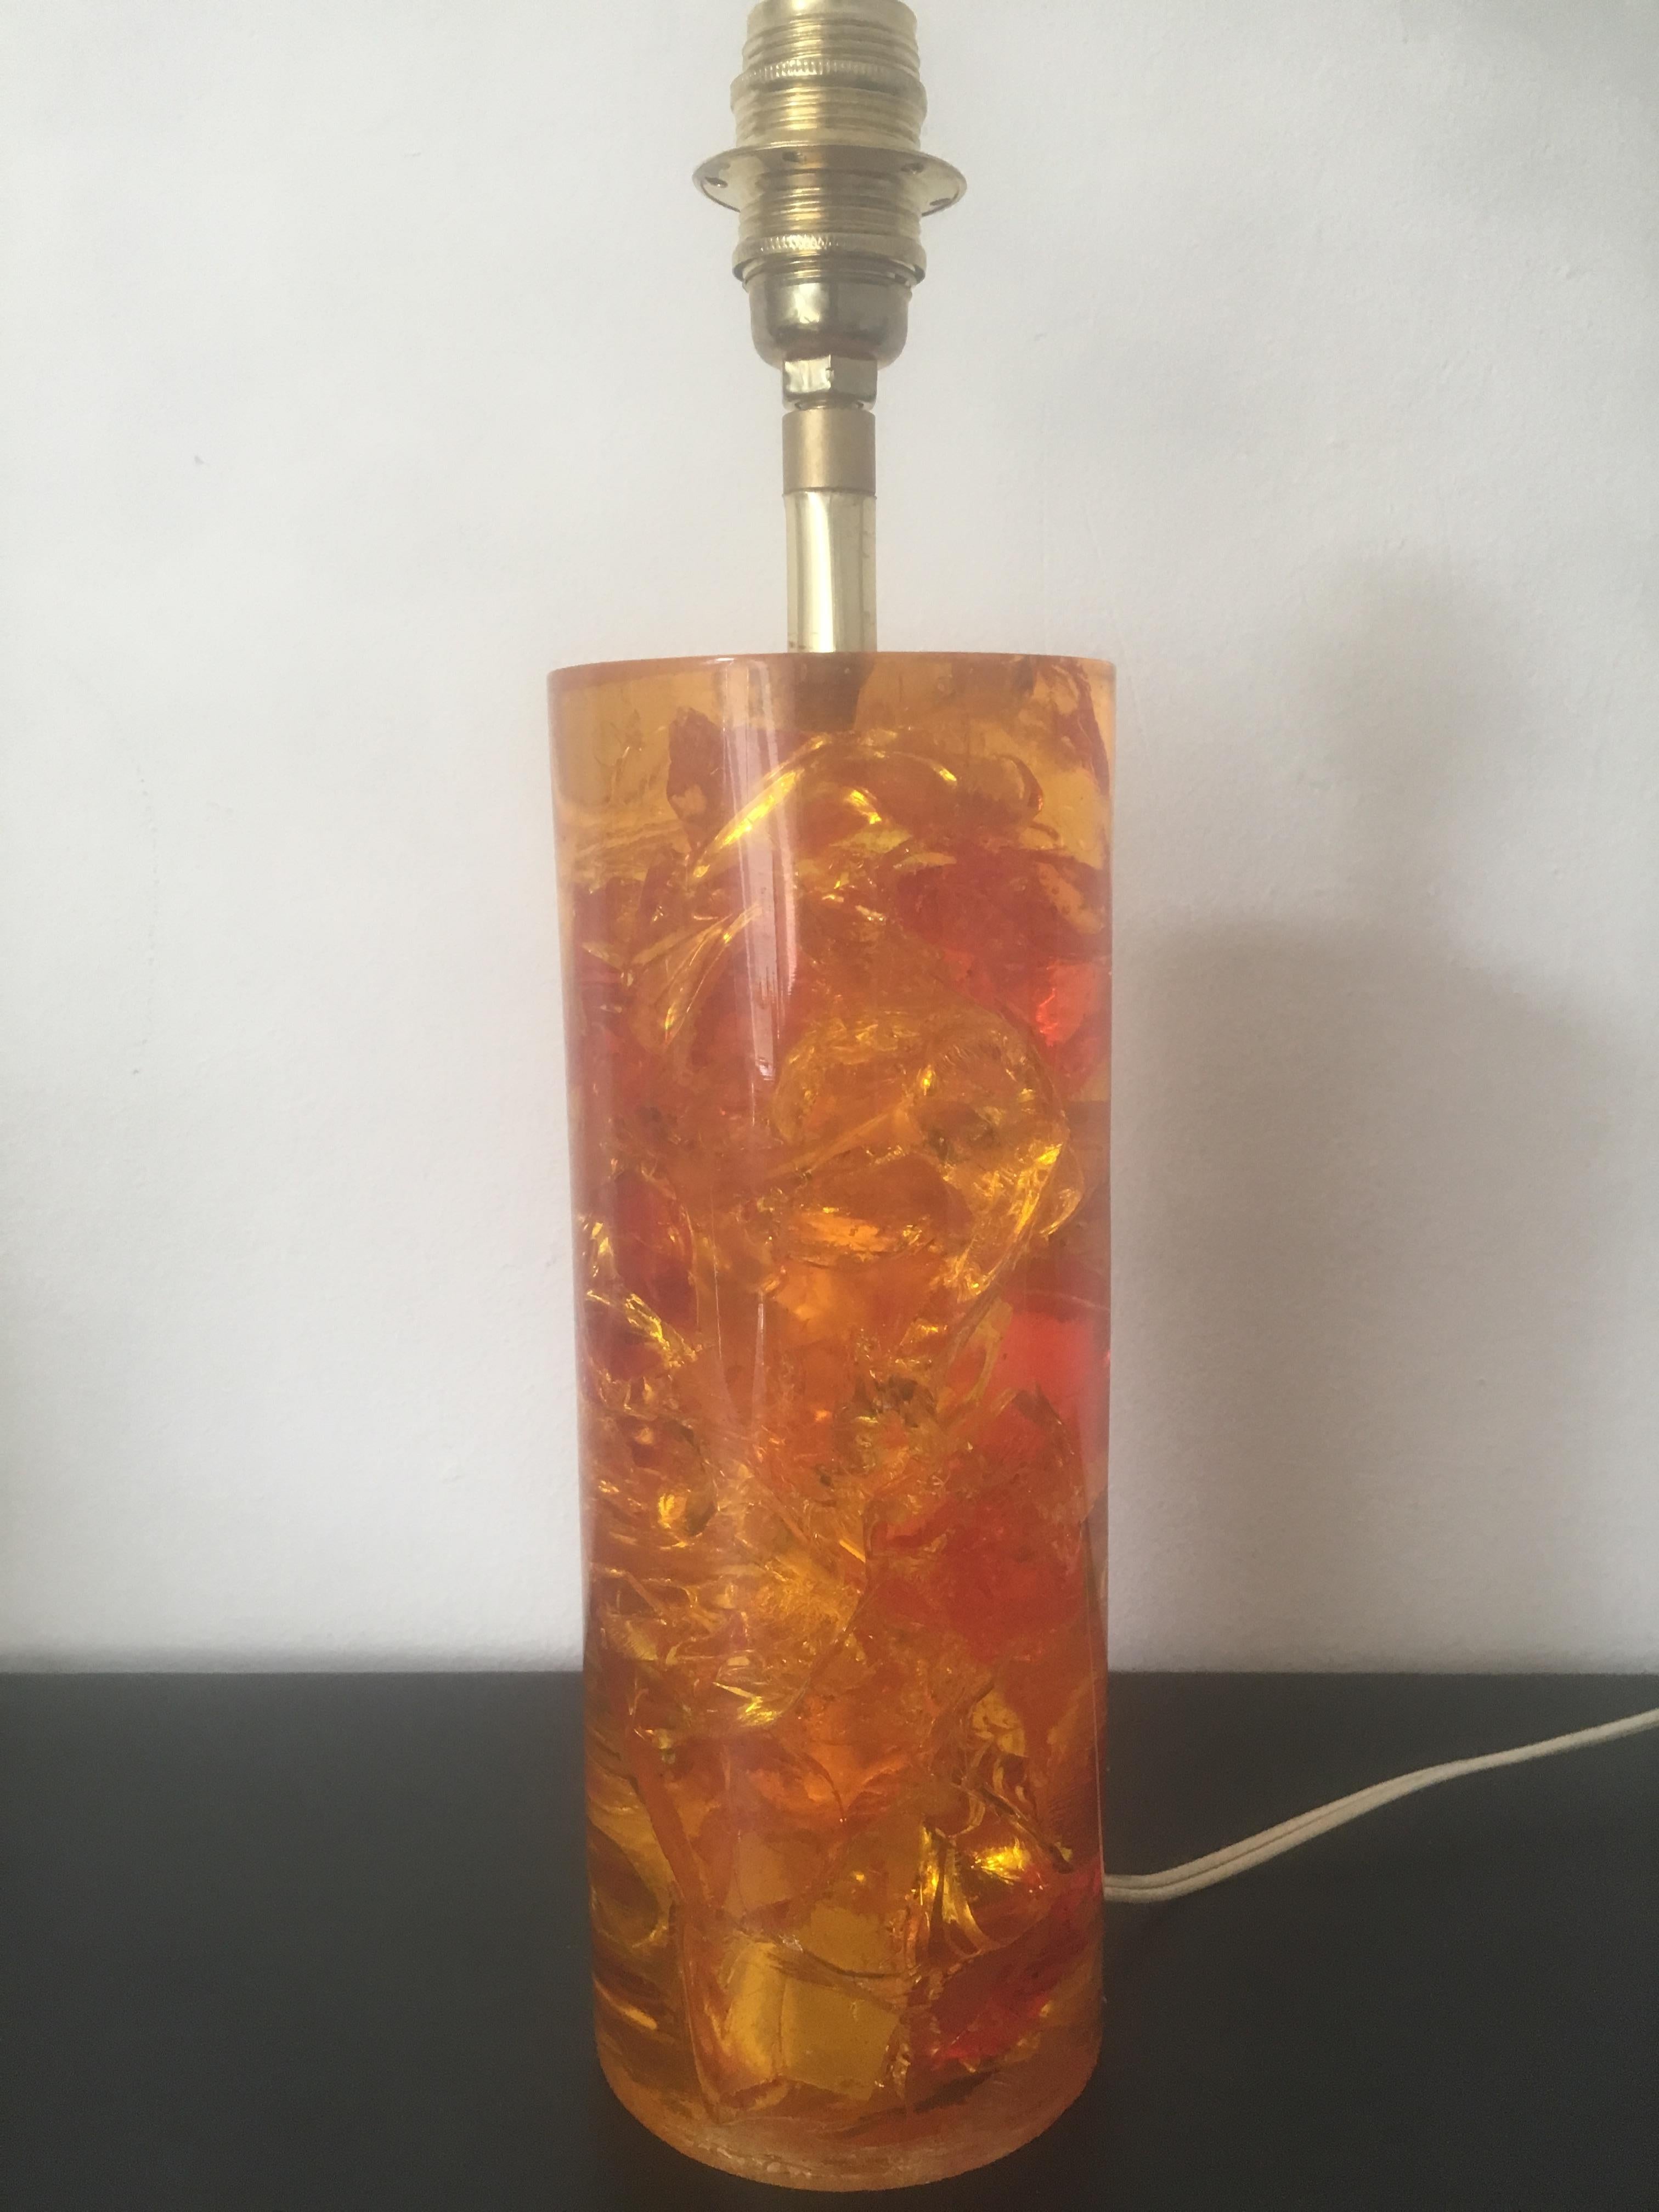 An orange fractal resin table lamp with interspersed red resin fragments designed by Pierre Giraudon in France in 1970s.
In working order, new on/off switch and plug.
An other orange fractal resin table lamp is also available if you want a